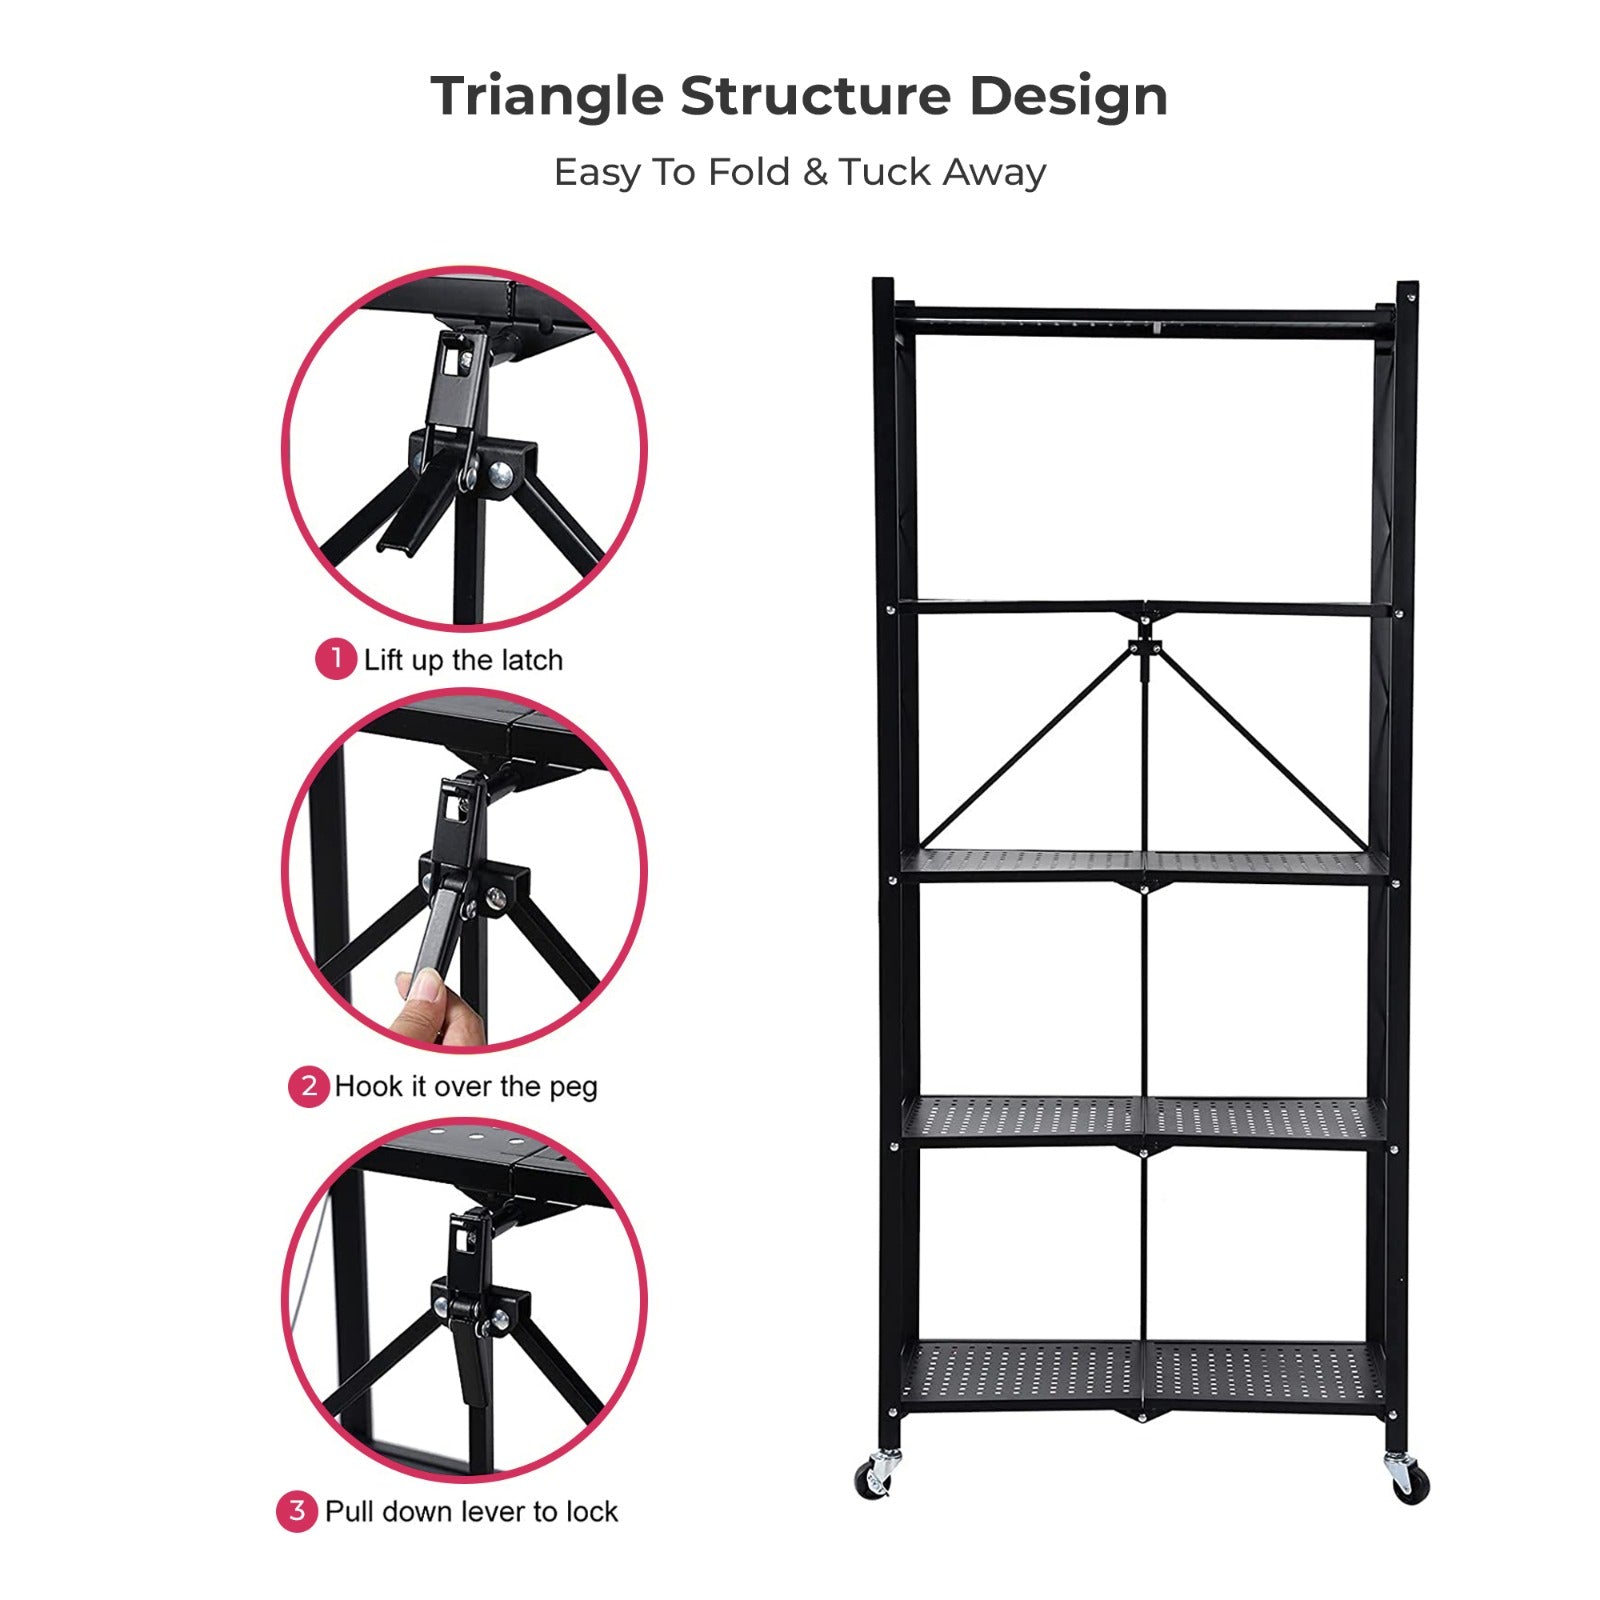 Multi Tier Foldable Storage Rack with Movable Wheel